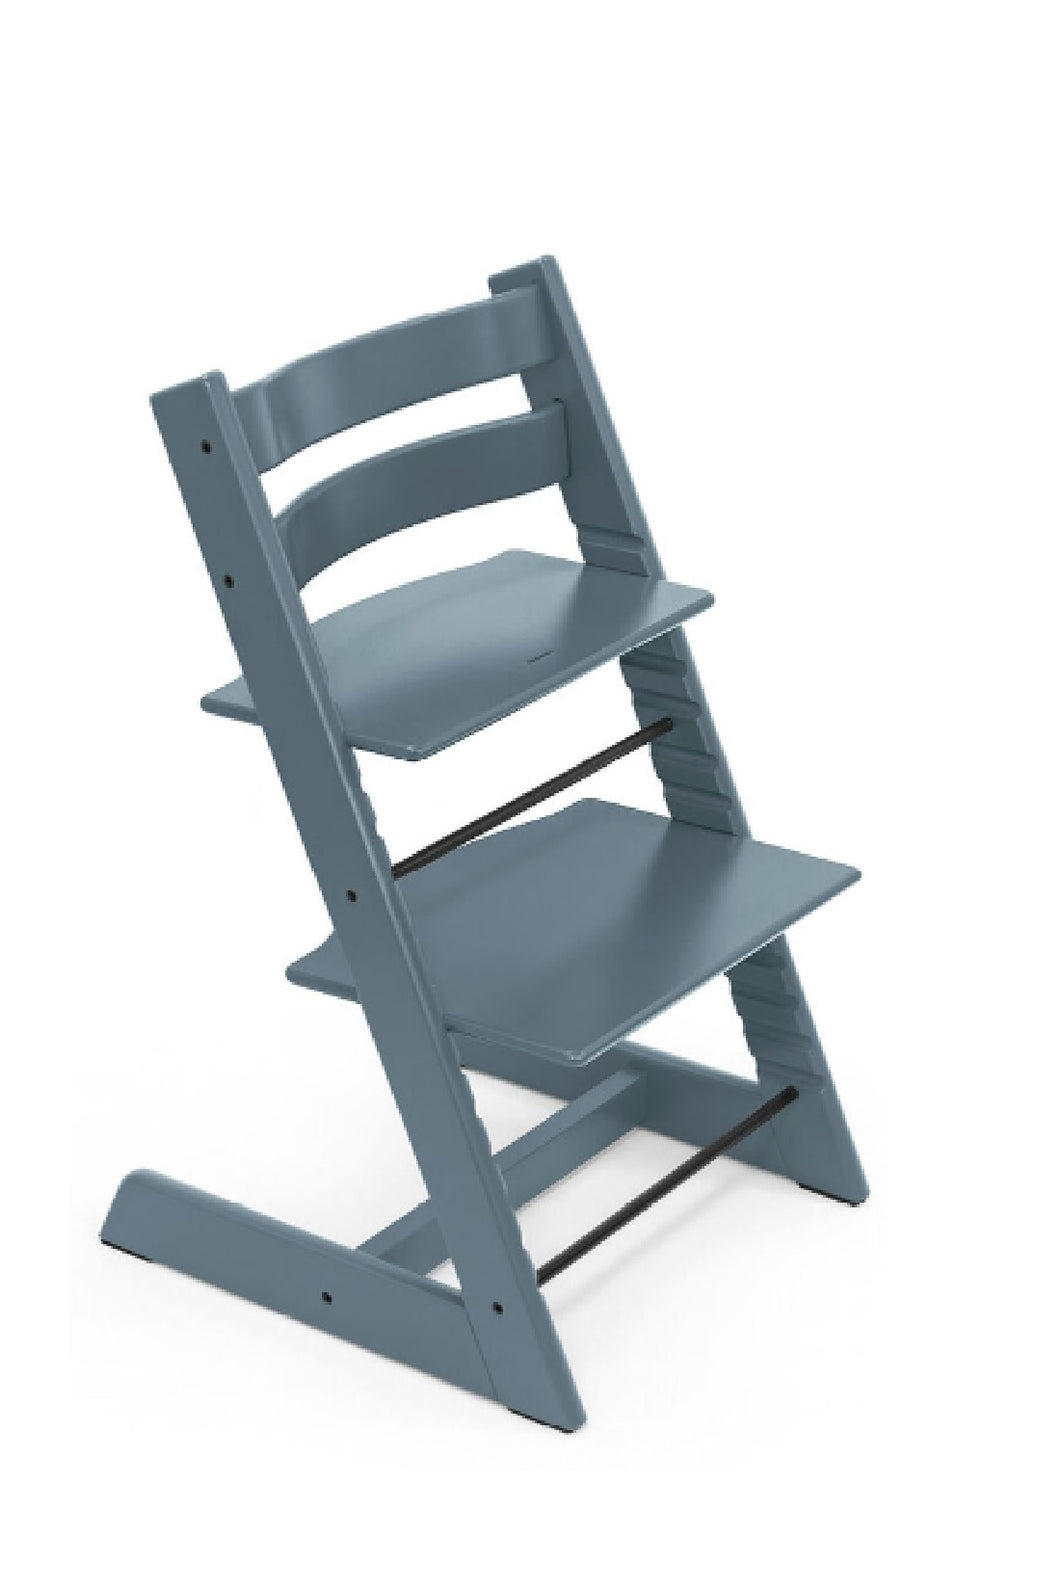 Stokke Tripp Trapp Chair (FREE GIFT)